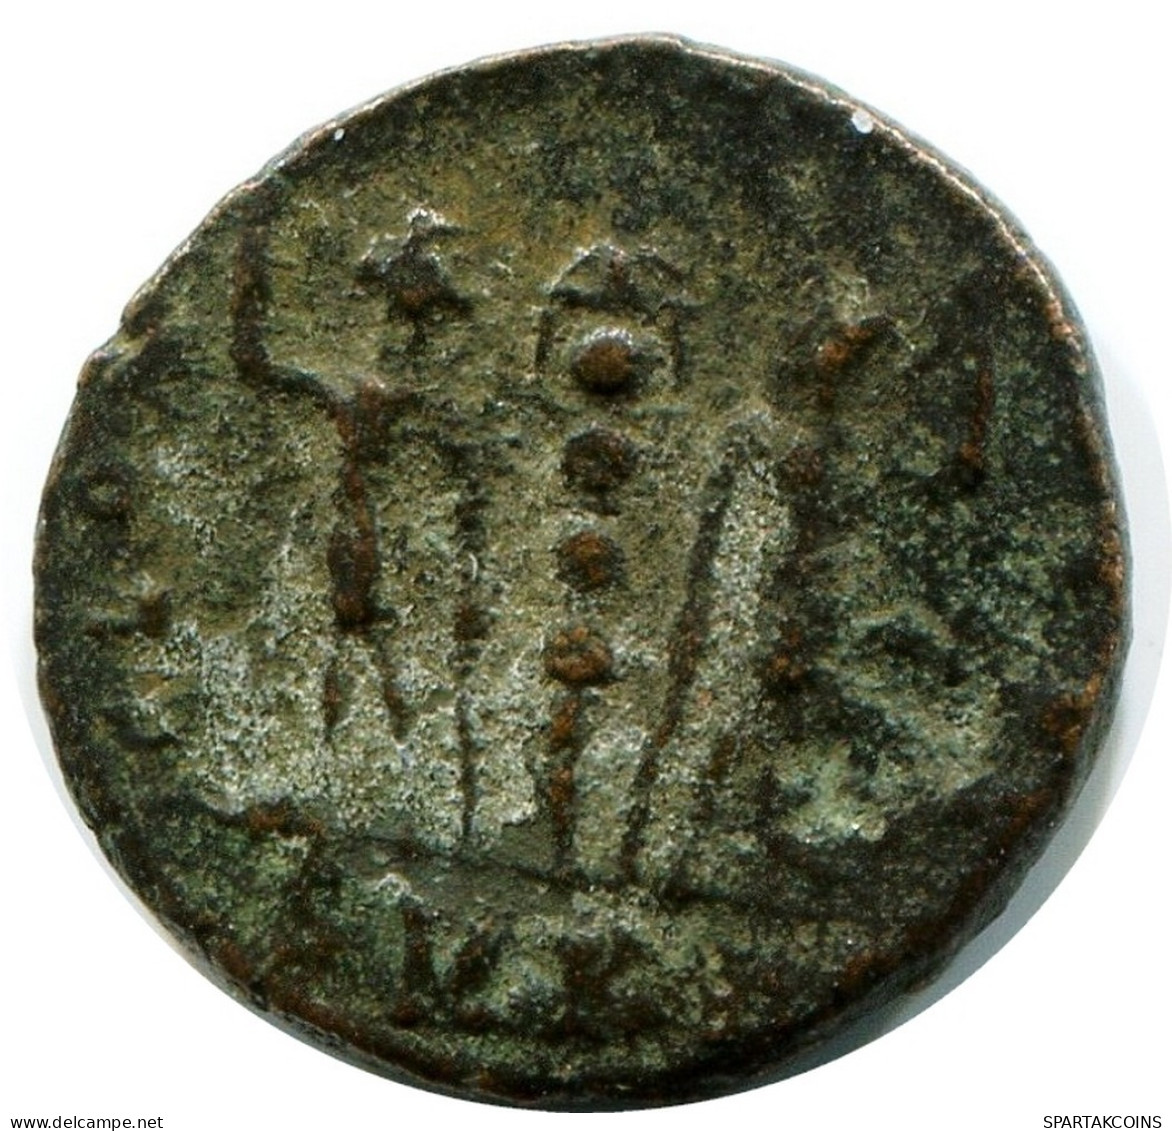 CONSTANS MINTED IN CYZICUS FOUND IN IHNASYAH HOARD EGYPT #ANC11584.14.F.A - El Impero Christiano (307 / 363)